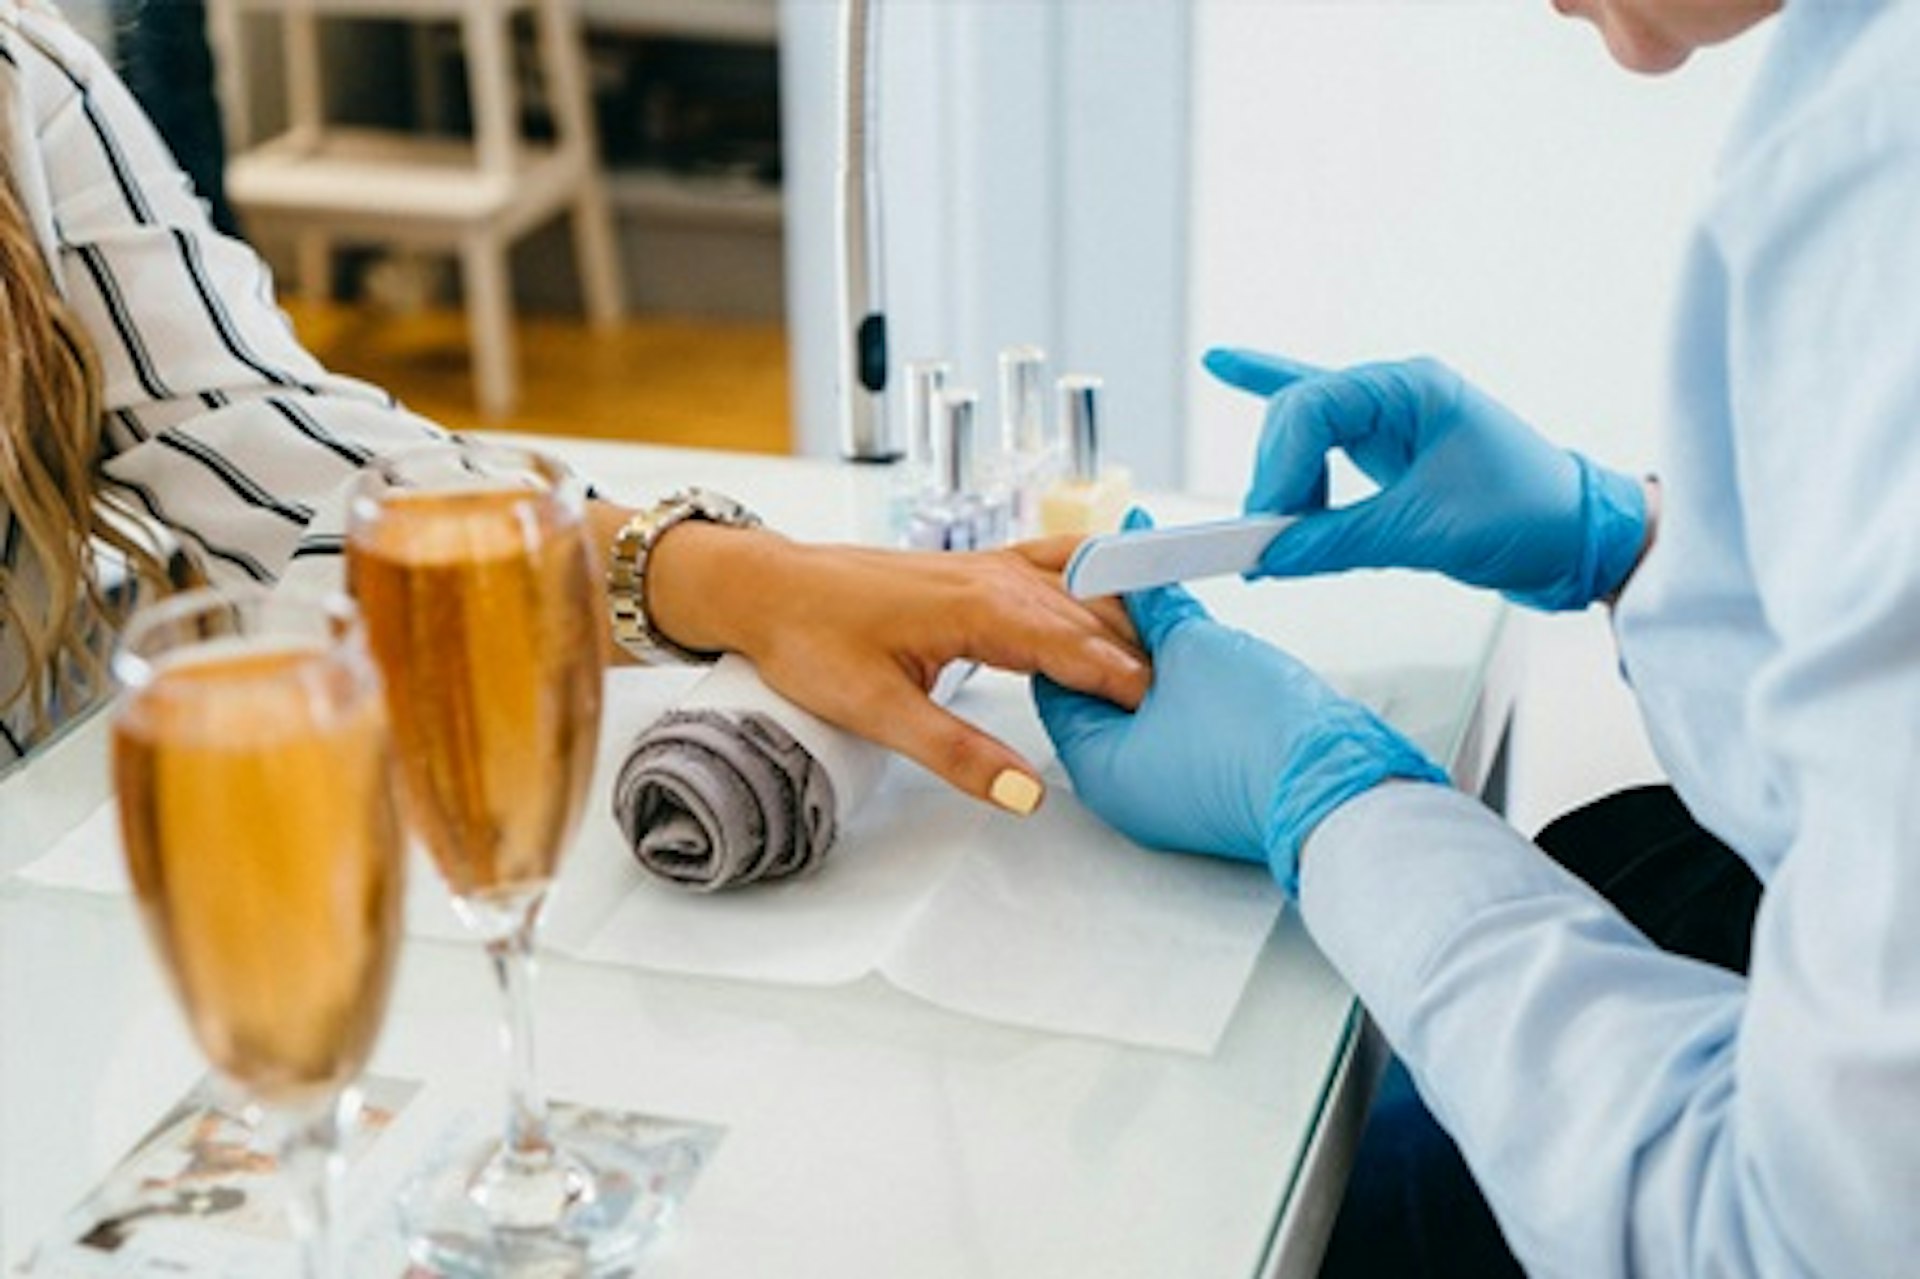 Hunky Dory Manicure with Pink Fizz for Two at London Grace 2